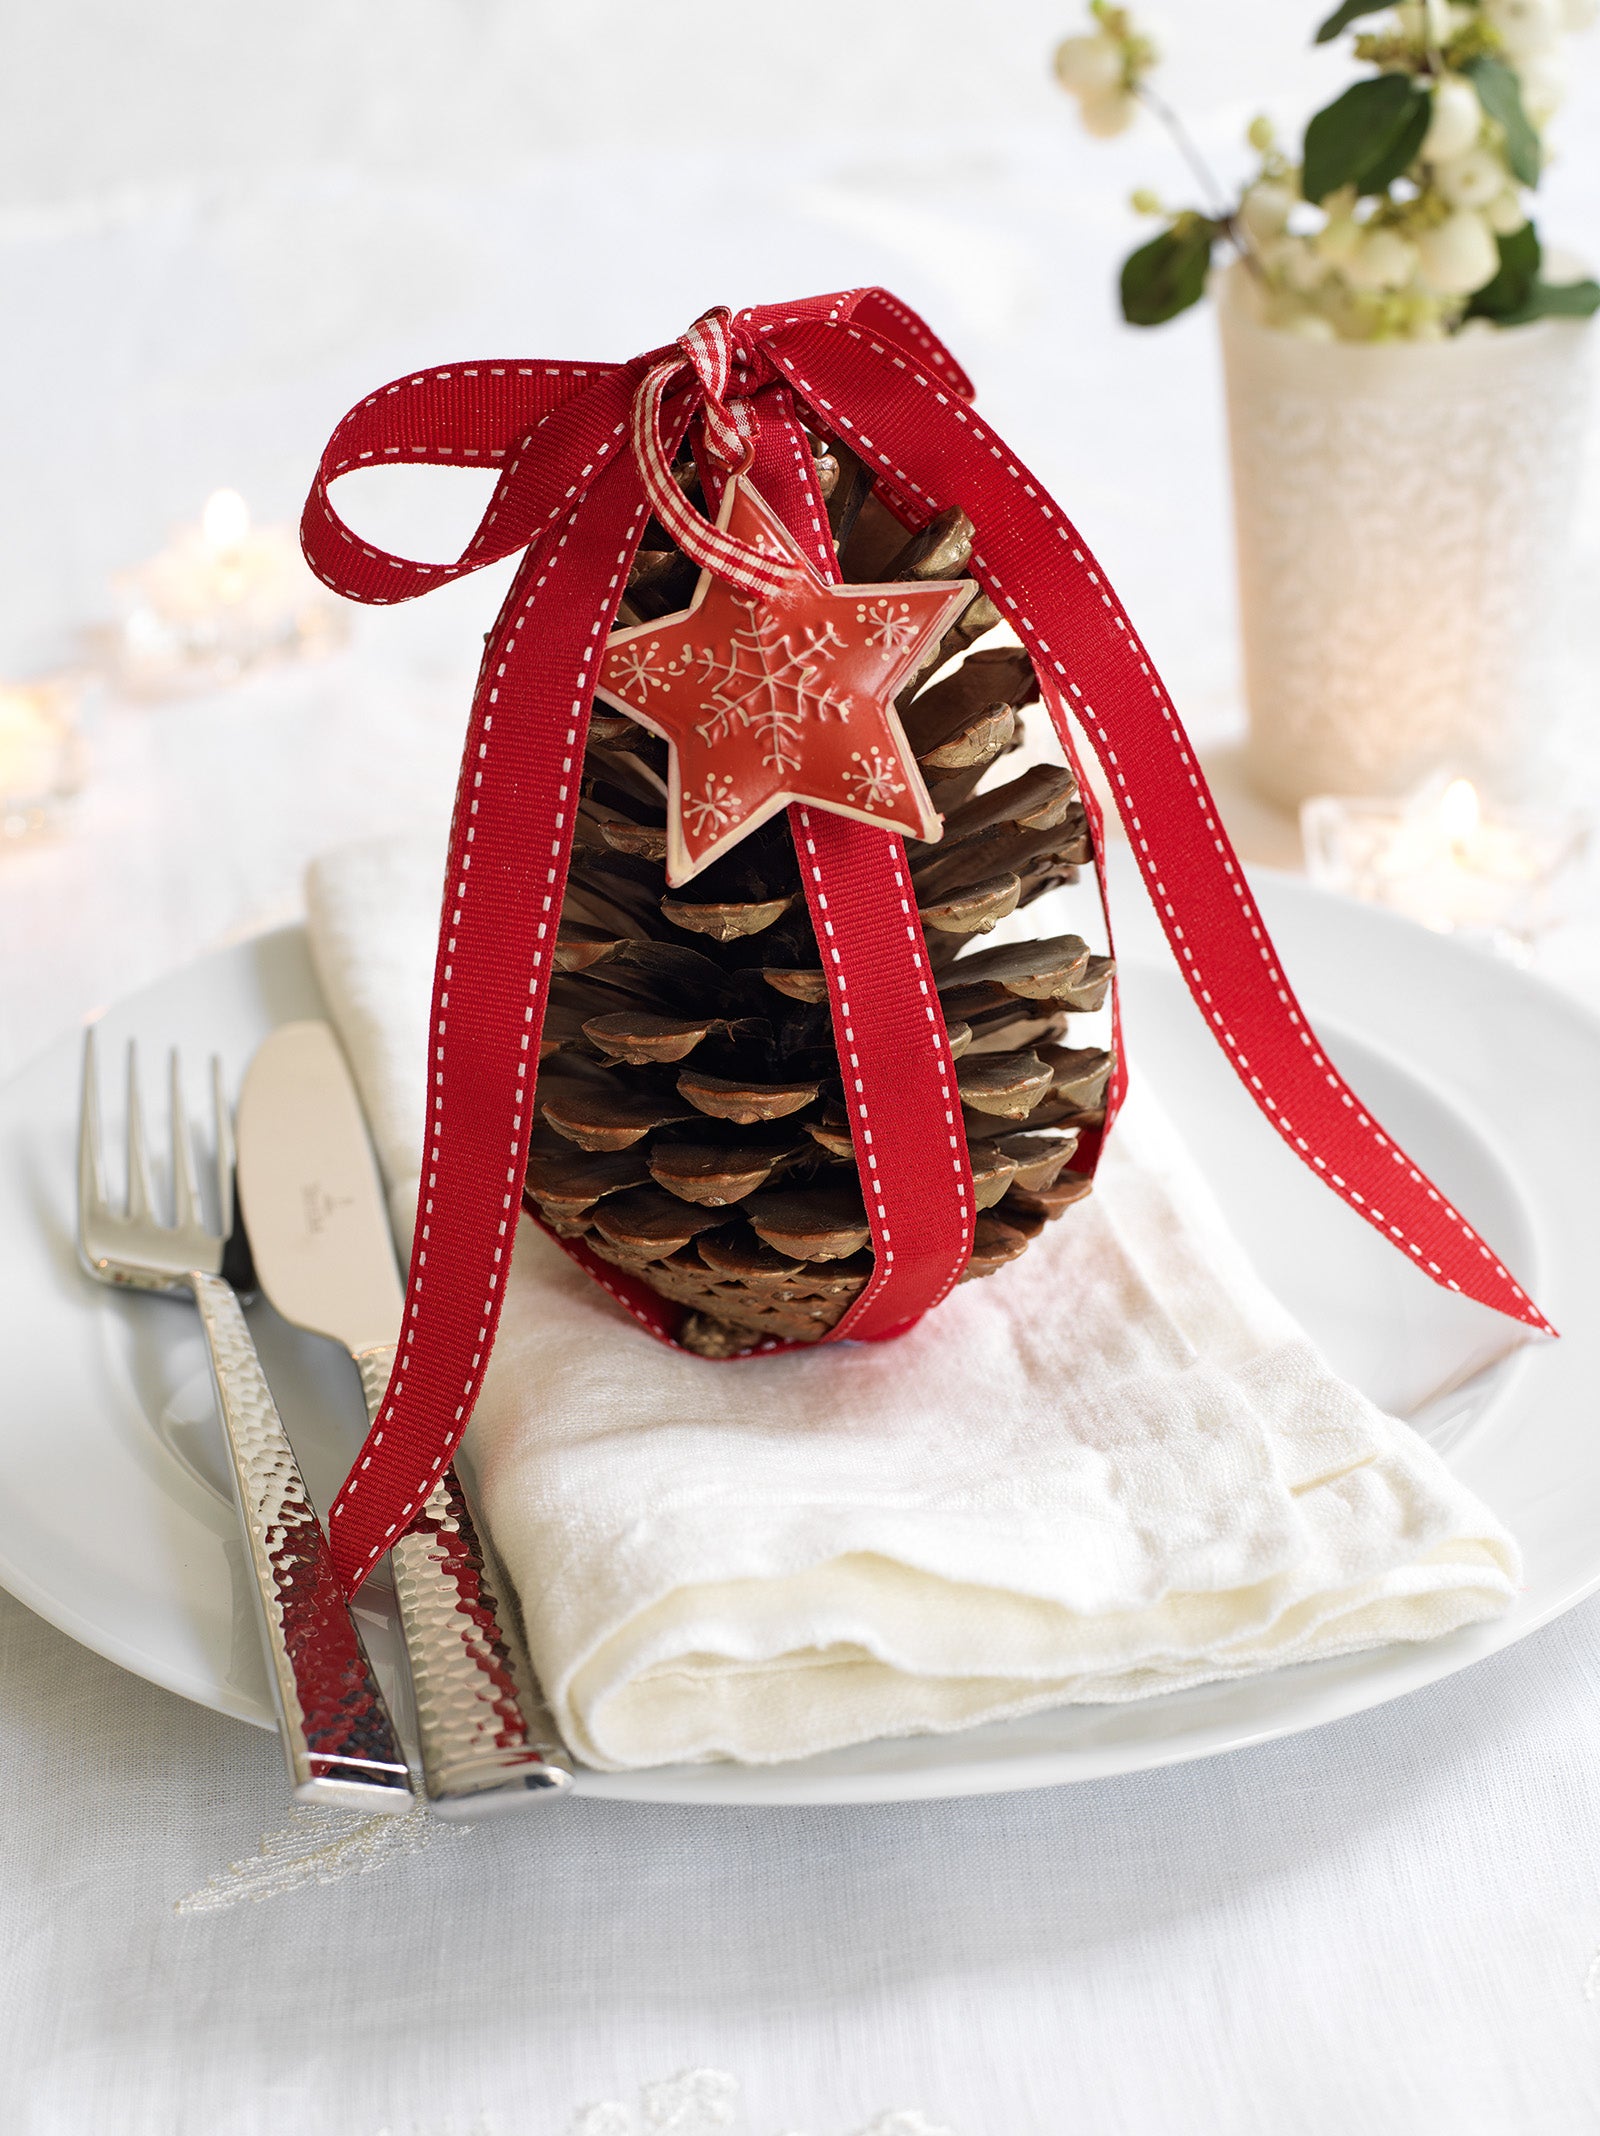 Pine cone place setting with red ribbon and tag